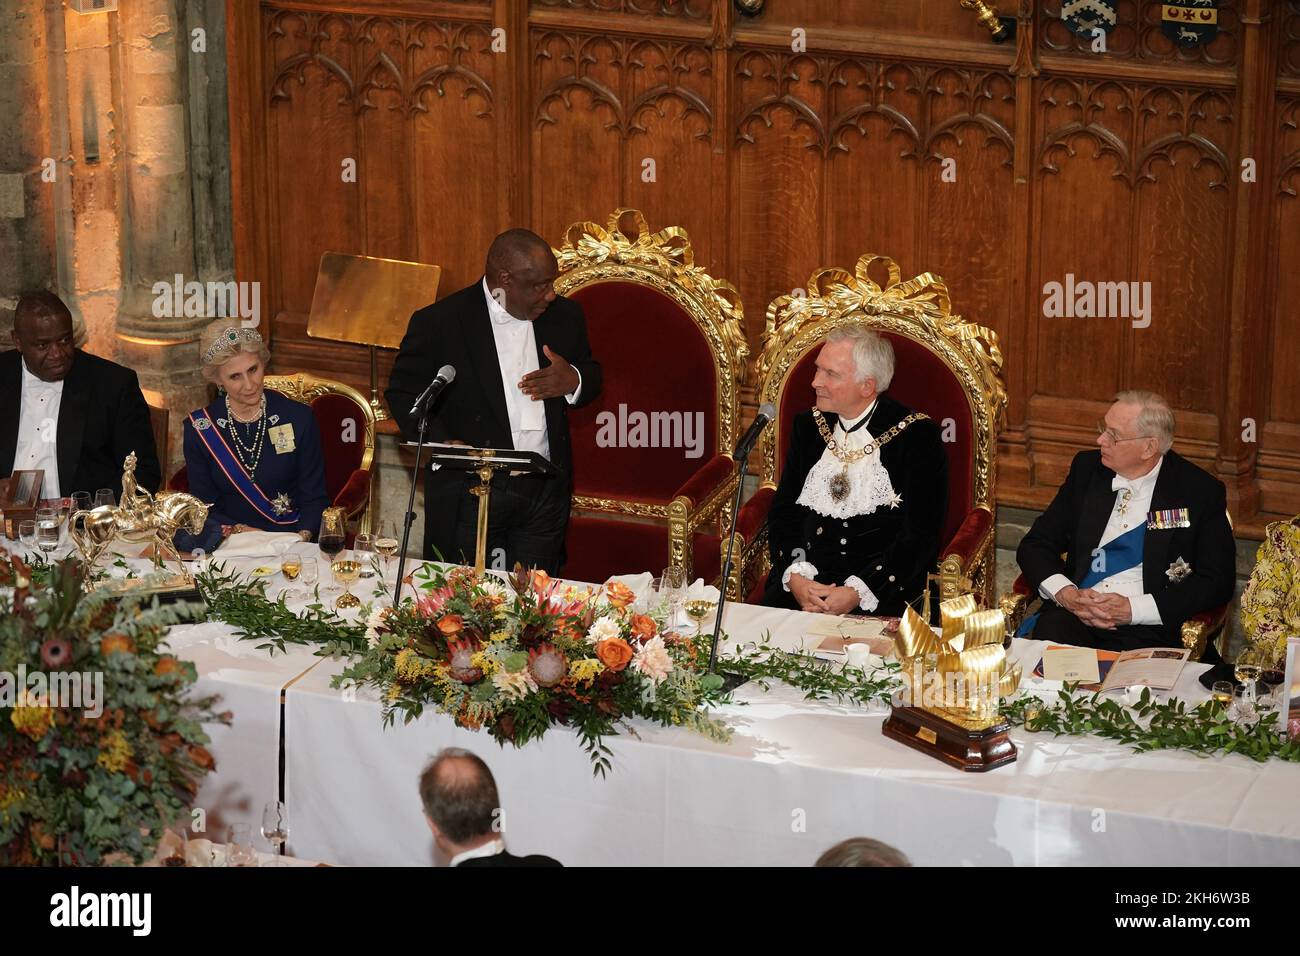 President Cyril Ramaphosa of South Africa speaks as the Lord Mayor of London, Nicholas Lyons, (second right) the Duke (right) and Duchess of Gloucester (second left) listen, during a banquet at the Guildhall in London, given by the Lord Mayor and City of London Corporation, during his state visit to the UK. Picture date: Wednesday November 23, 2022. Stock Photo